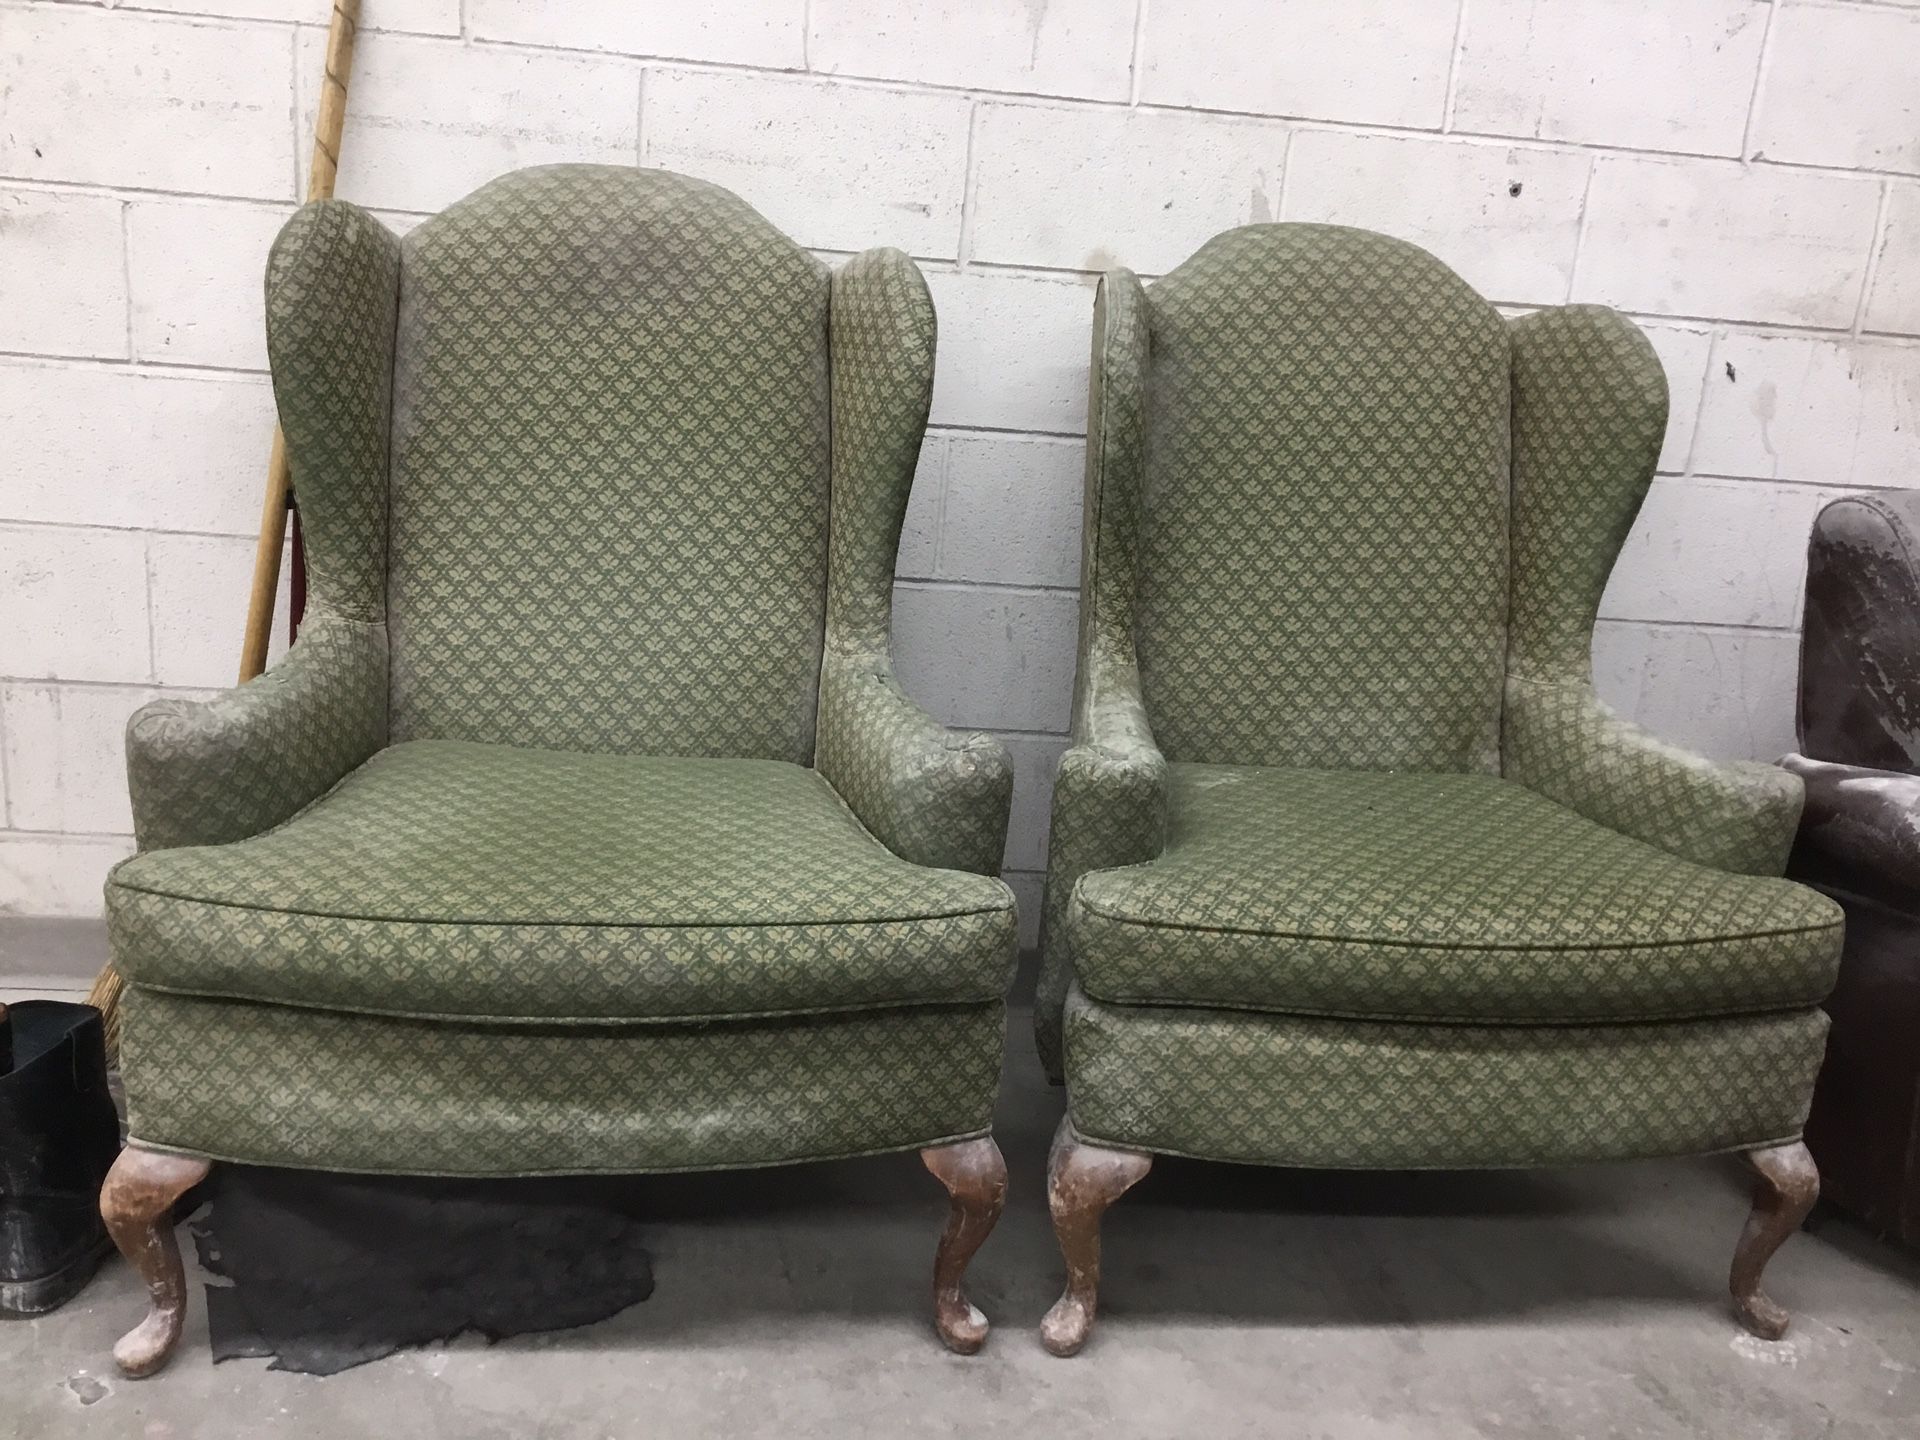 Chairs, Upholstered With Wood Trim